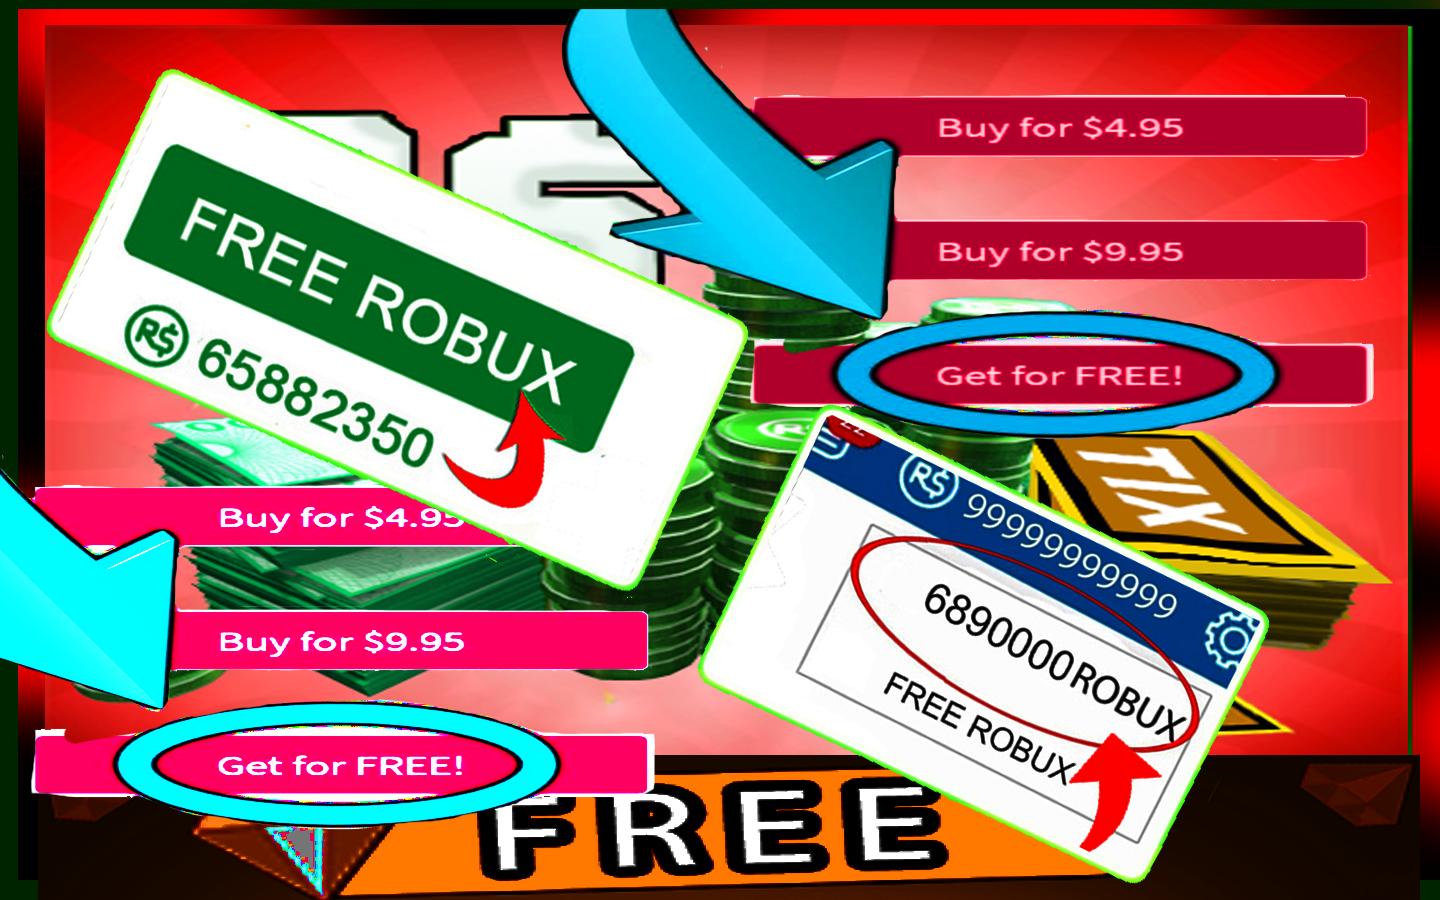 Guide Free Robux Counter Free Rbx 2020 Tips For Android Apk Download - guide for robux for android apk download